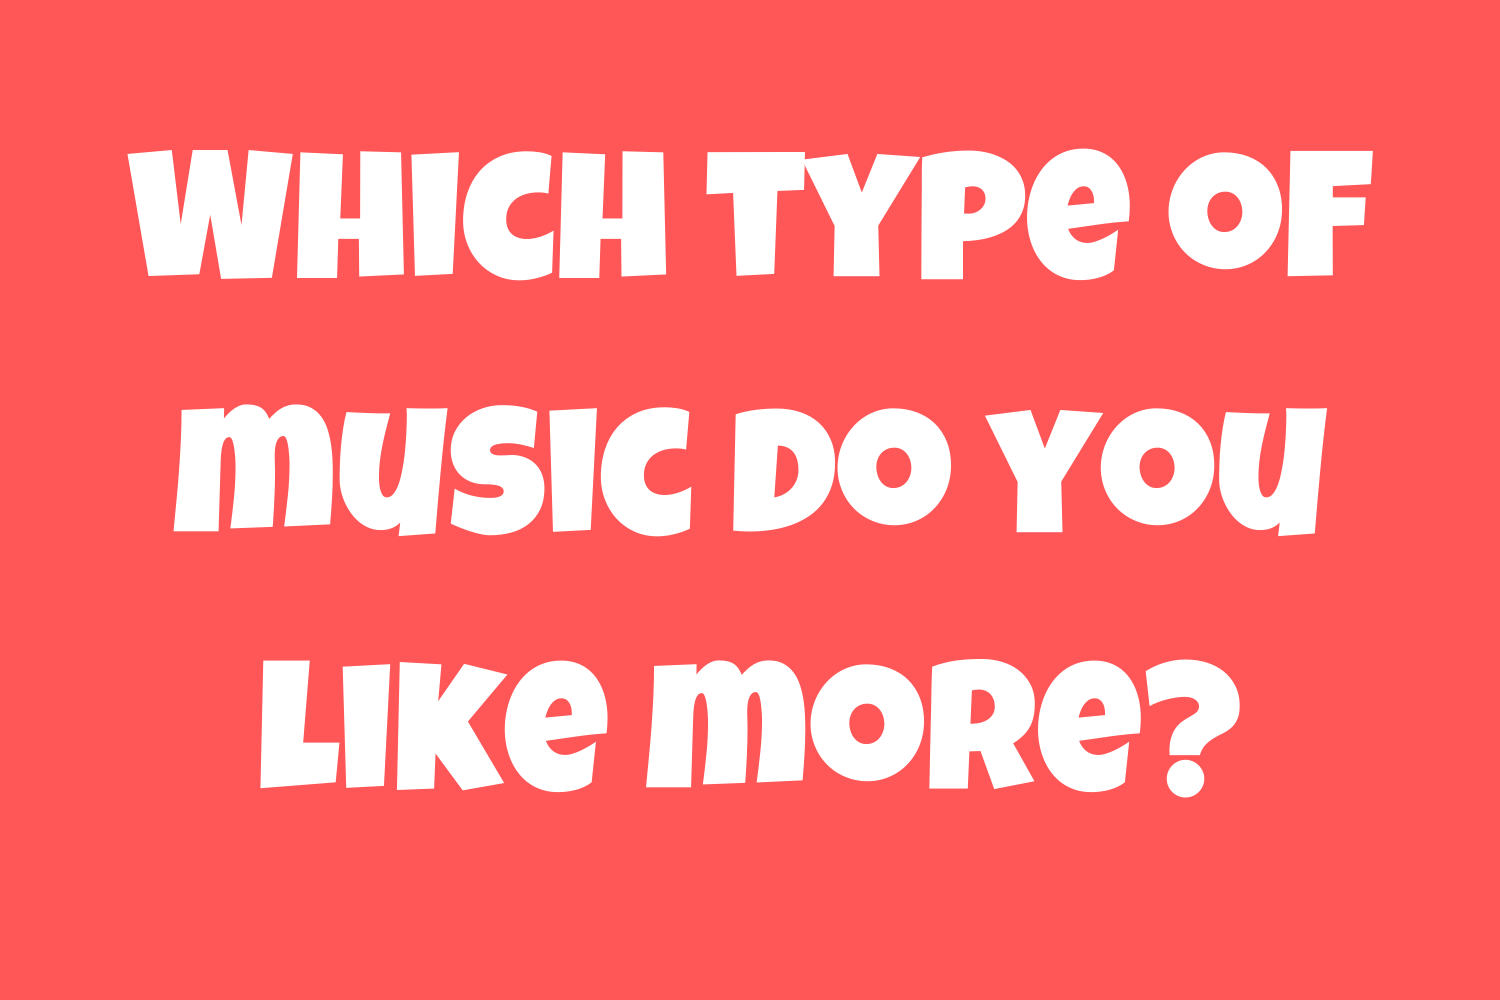 Which type of music do you like more?